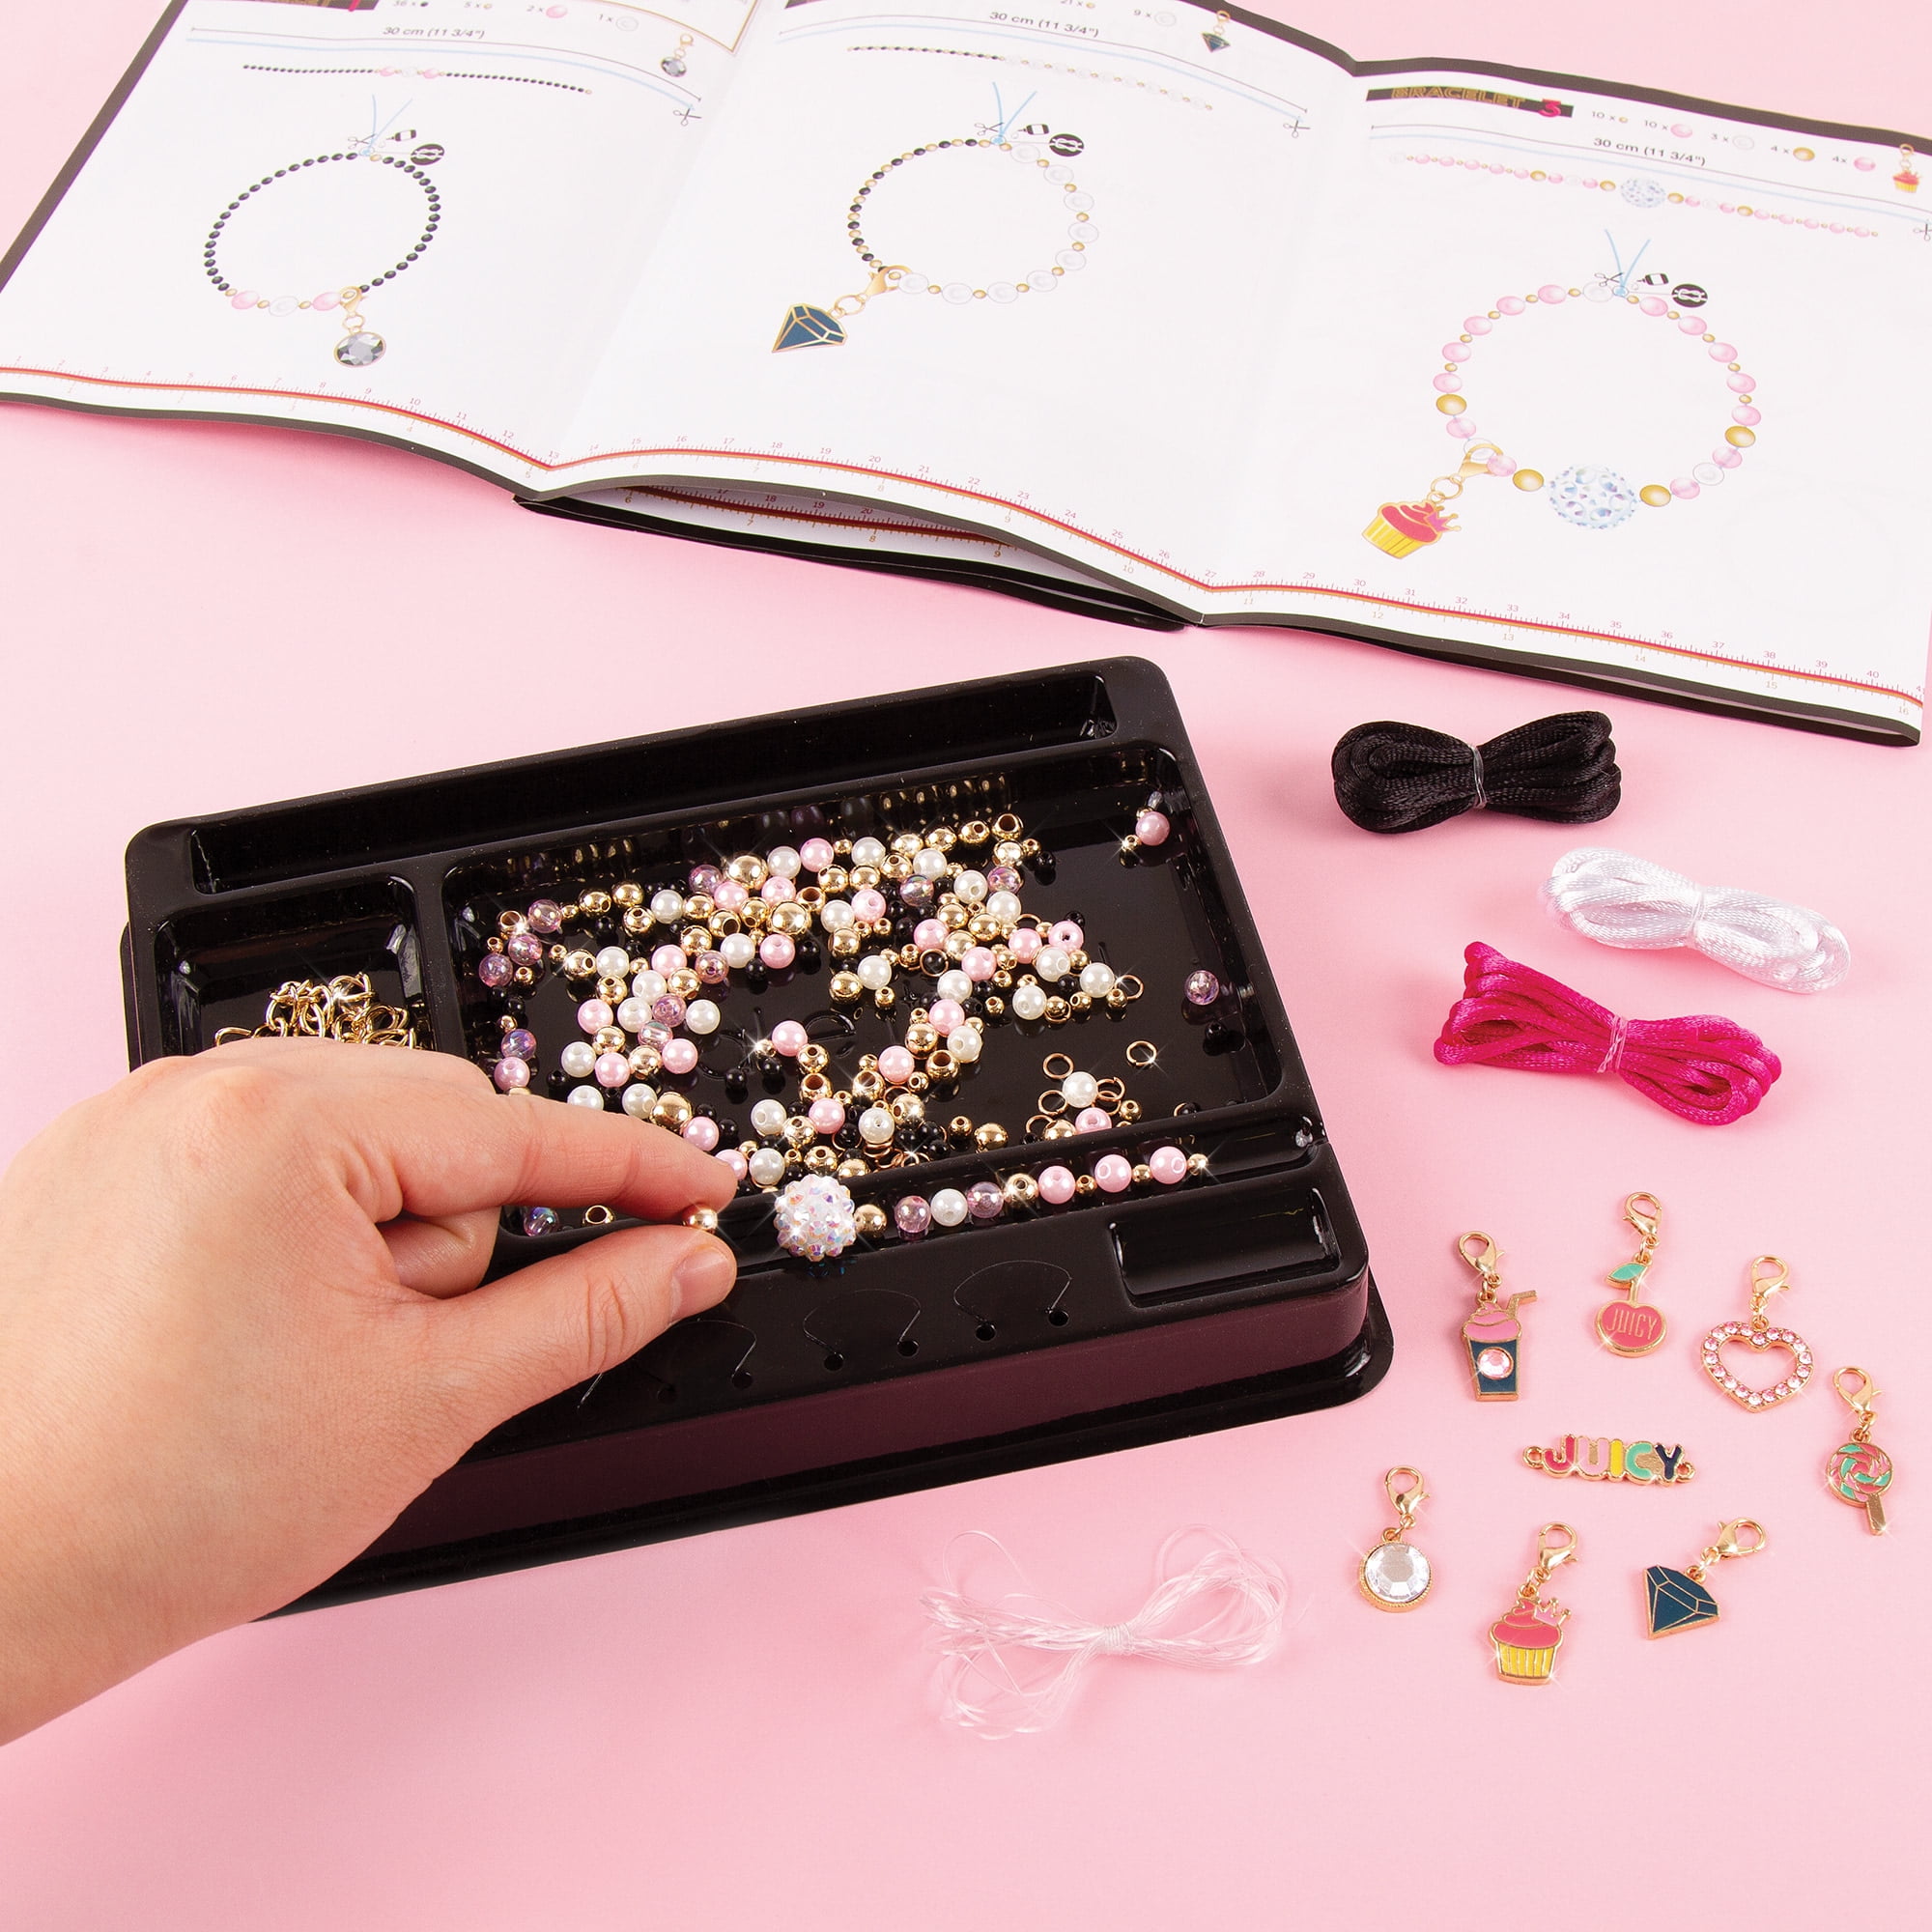 2023 Gifts For Girls - Make It Real Juicy Couture Pink And Precious  Bracelets - Diy Charm Bracelet Making Kit With Beads